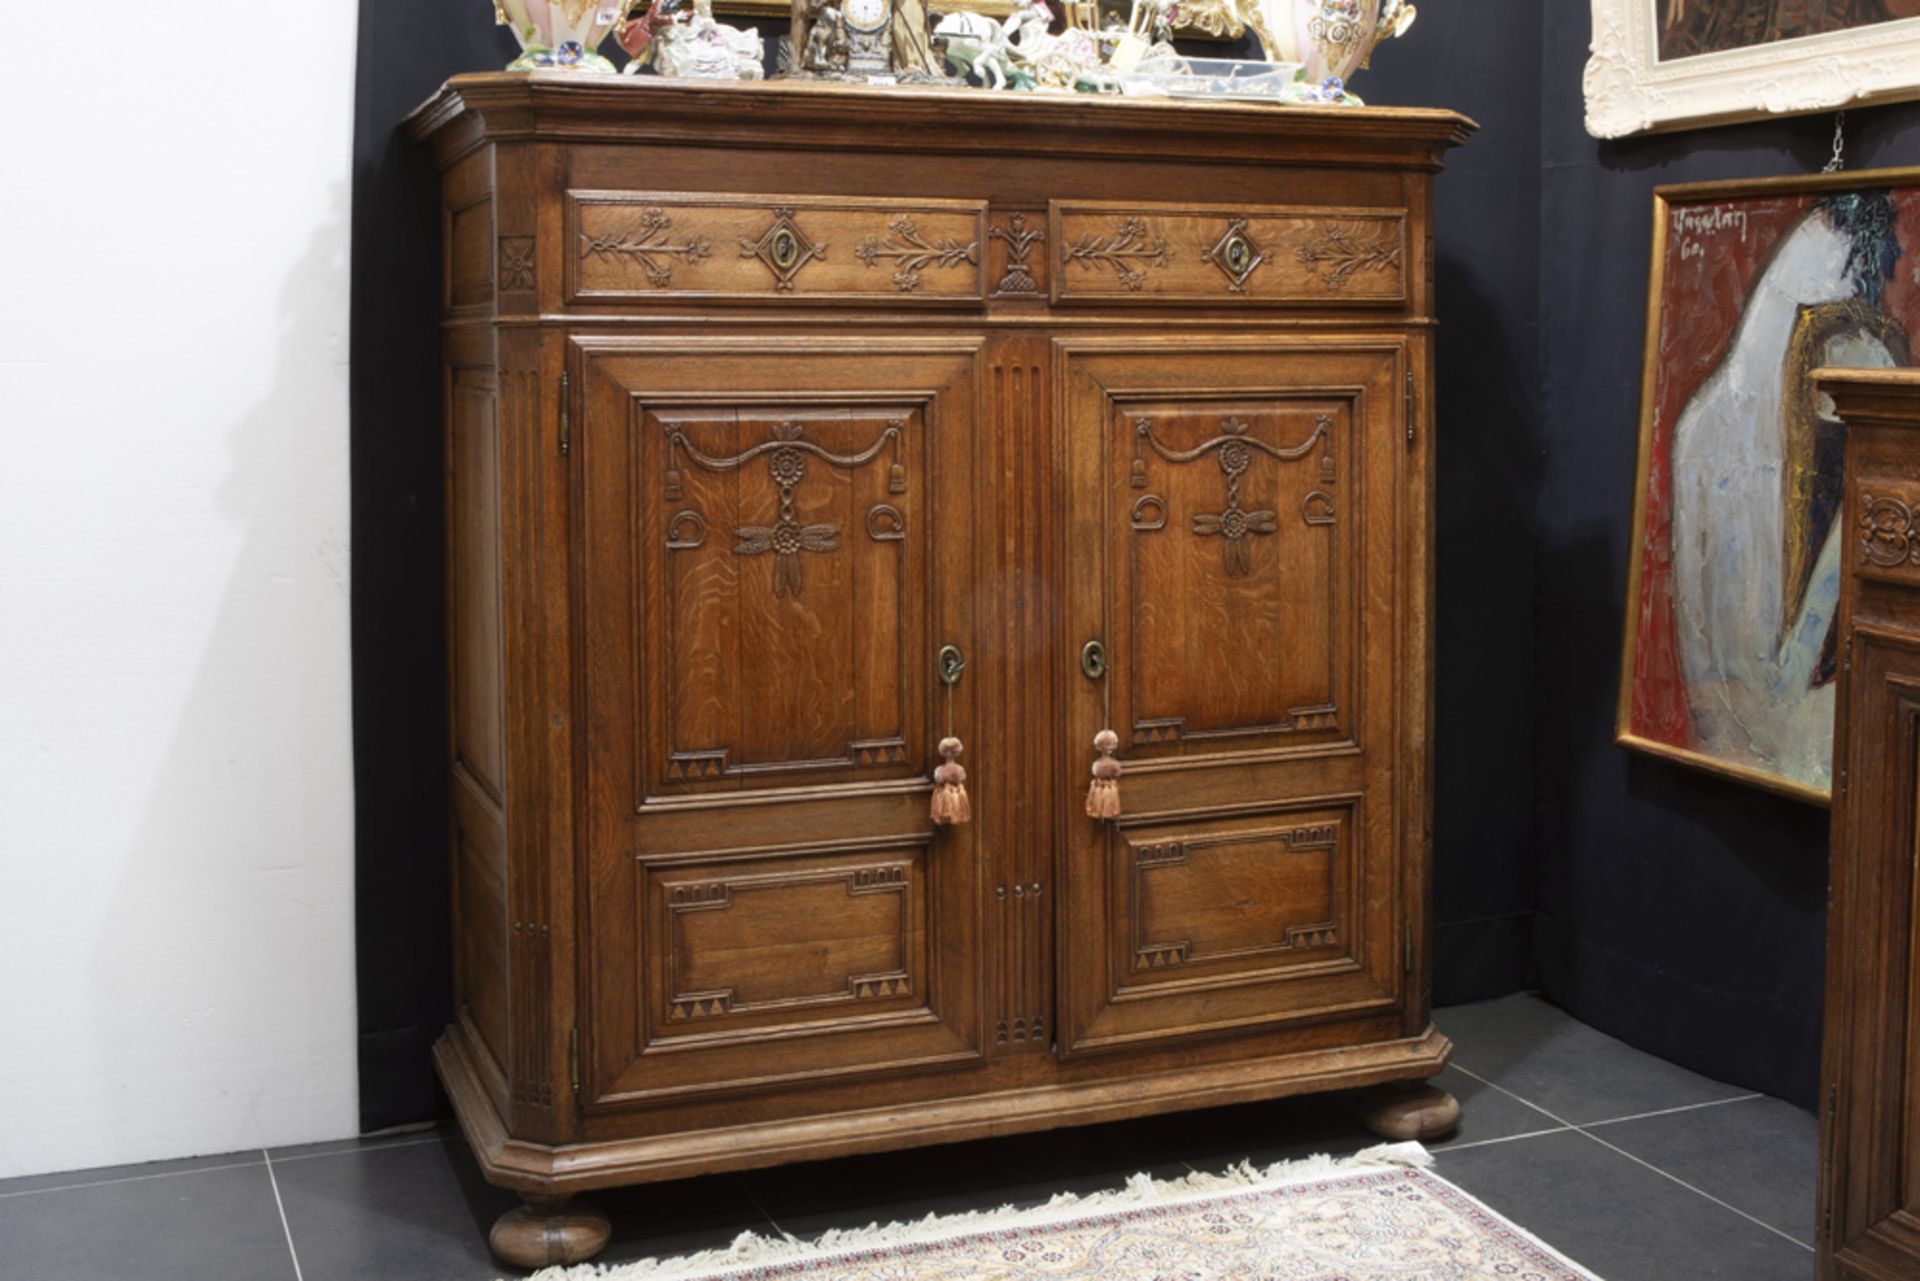 18th Cent. neoclassical sideboard/dressoir in oak with finely sculpted ornamentation || Vrij hoge